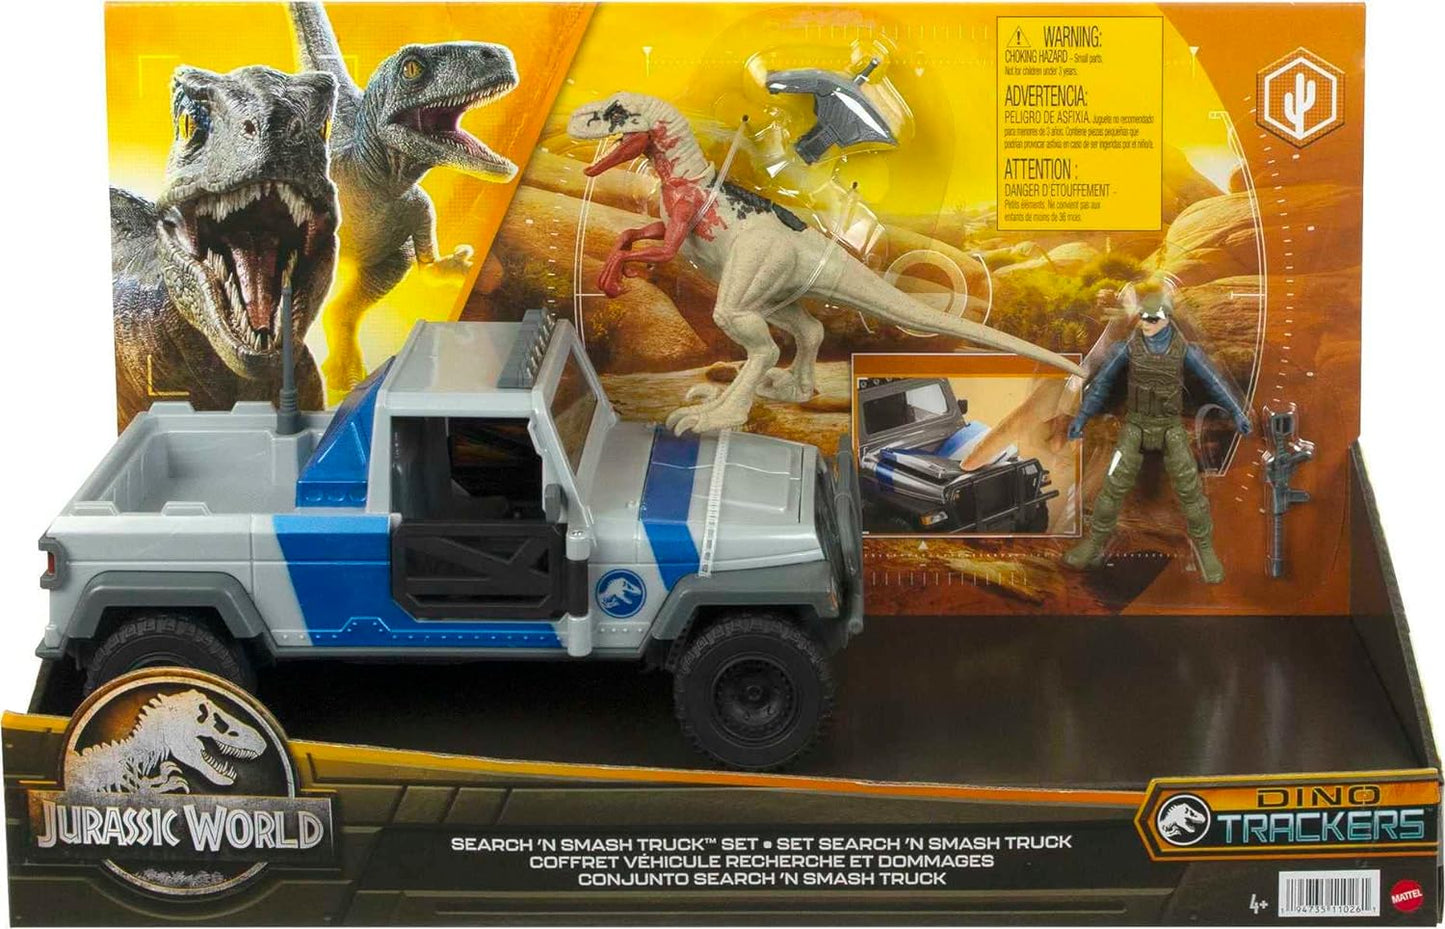 Mattel Jurassic World Toys Search 'N Smash Truck Set with Atrociraptor Dinosaur & Human Action Figure, Vehicle with Destruct Features